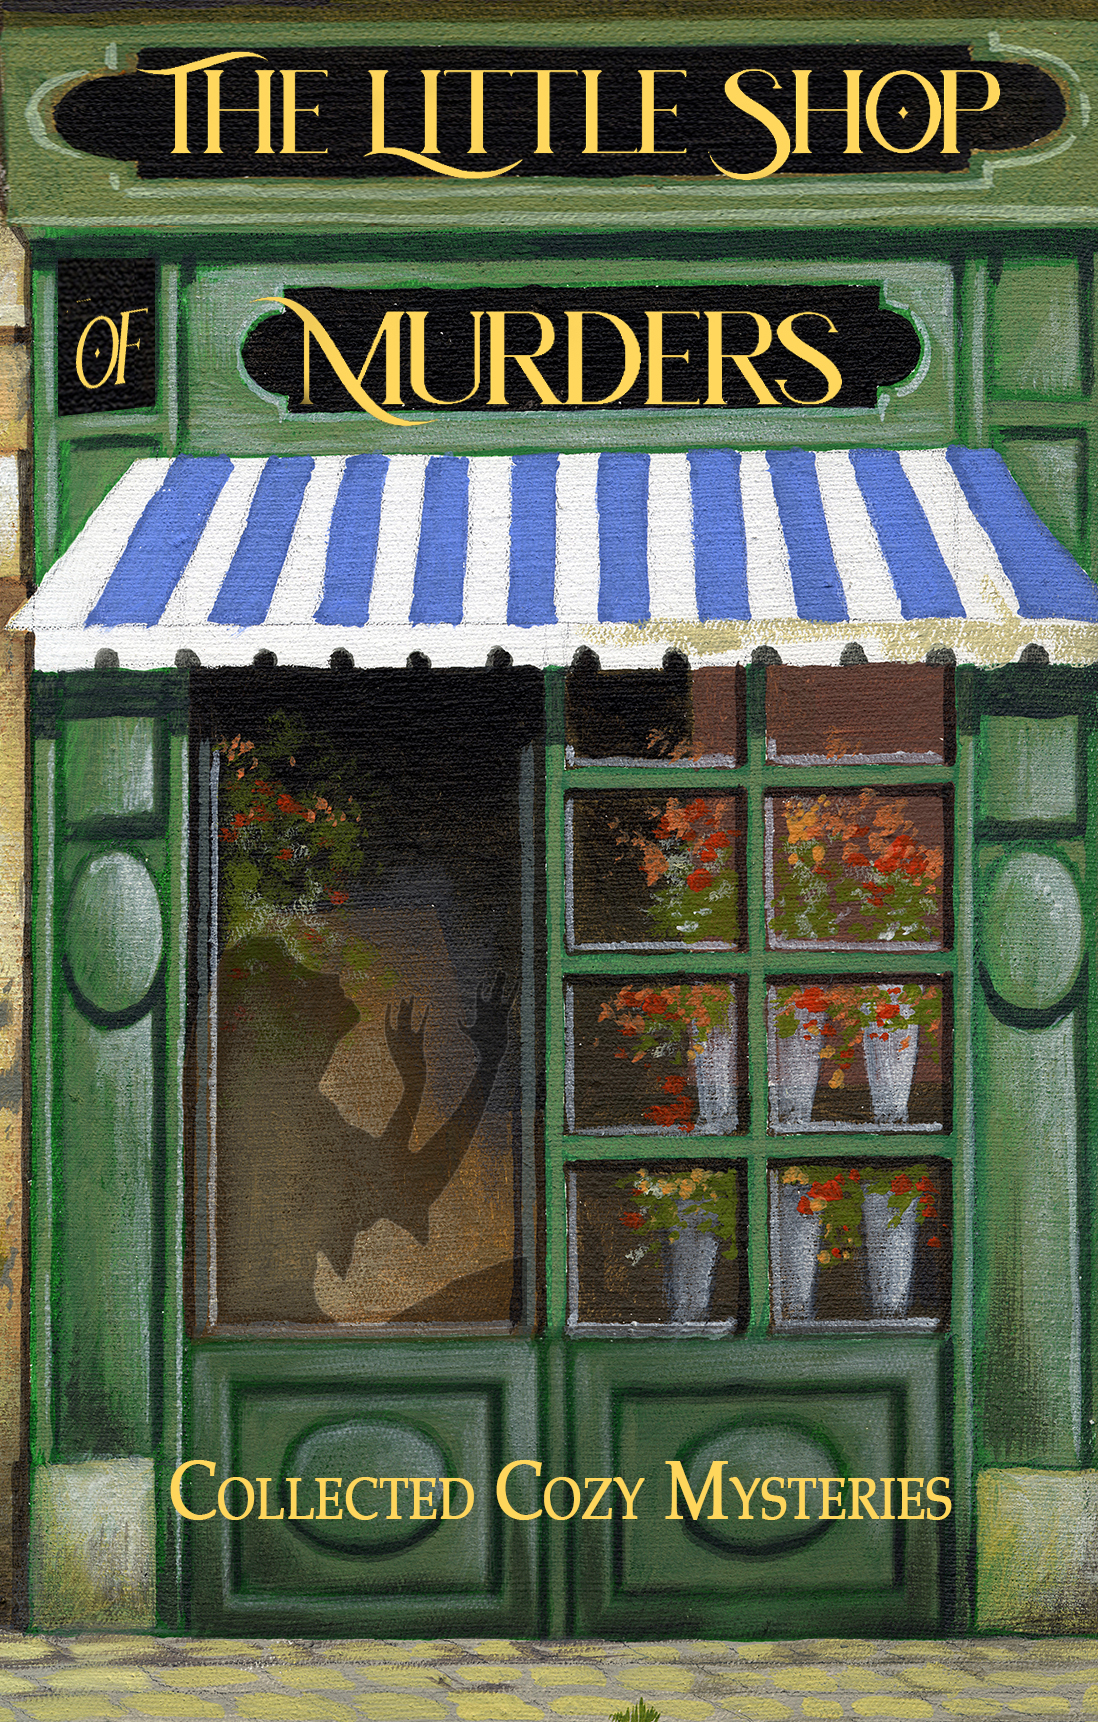 Little Shop of Murder a charity cozy mystery anthology featuring some of the best cozy mystery authors today. Raising funds for charities for children in the USA, UK and Ireland.